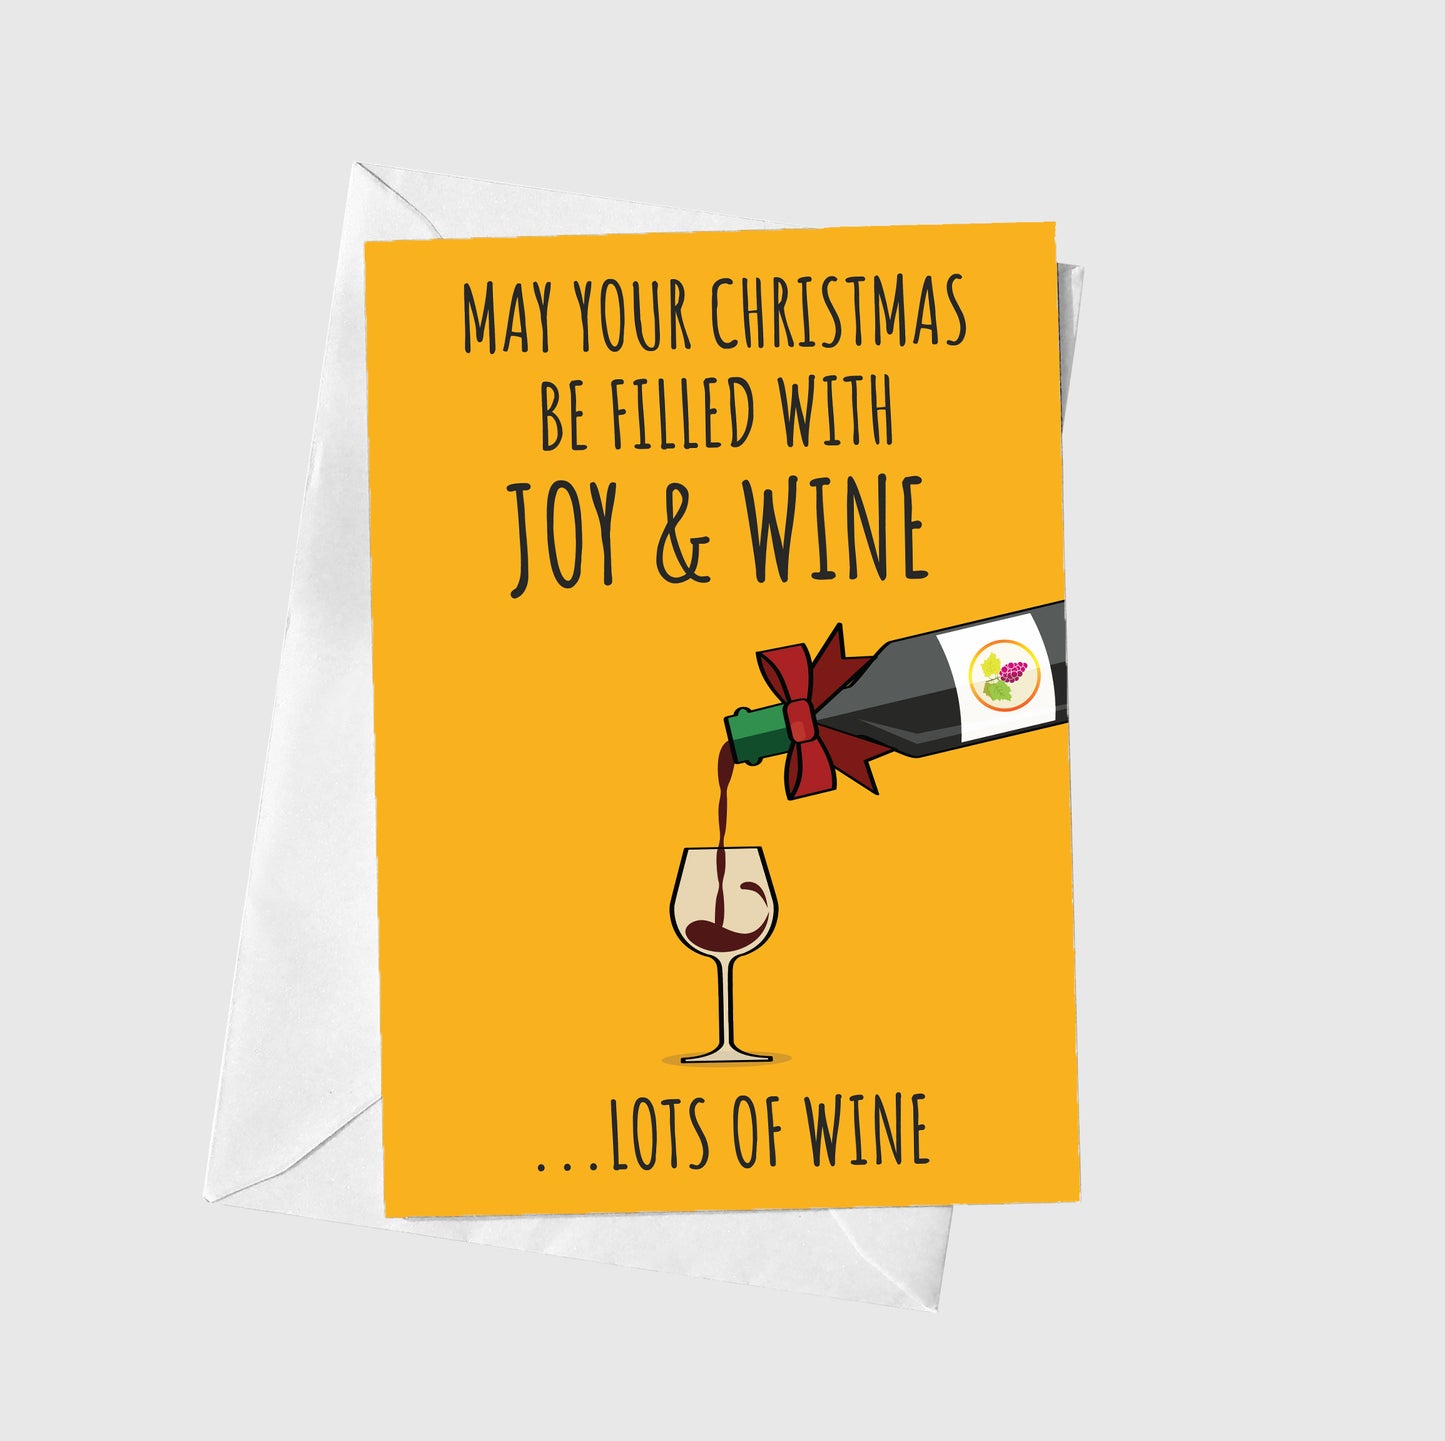 May Your Christmas Be Filled With Joy & Wine